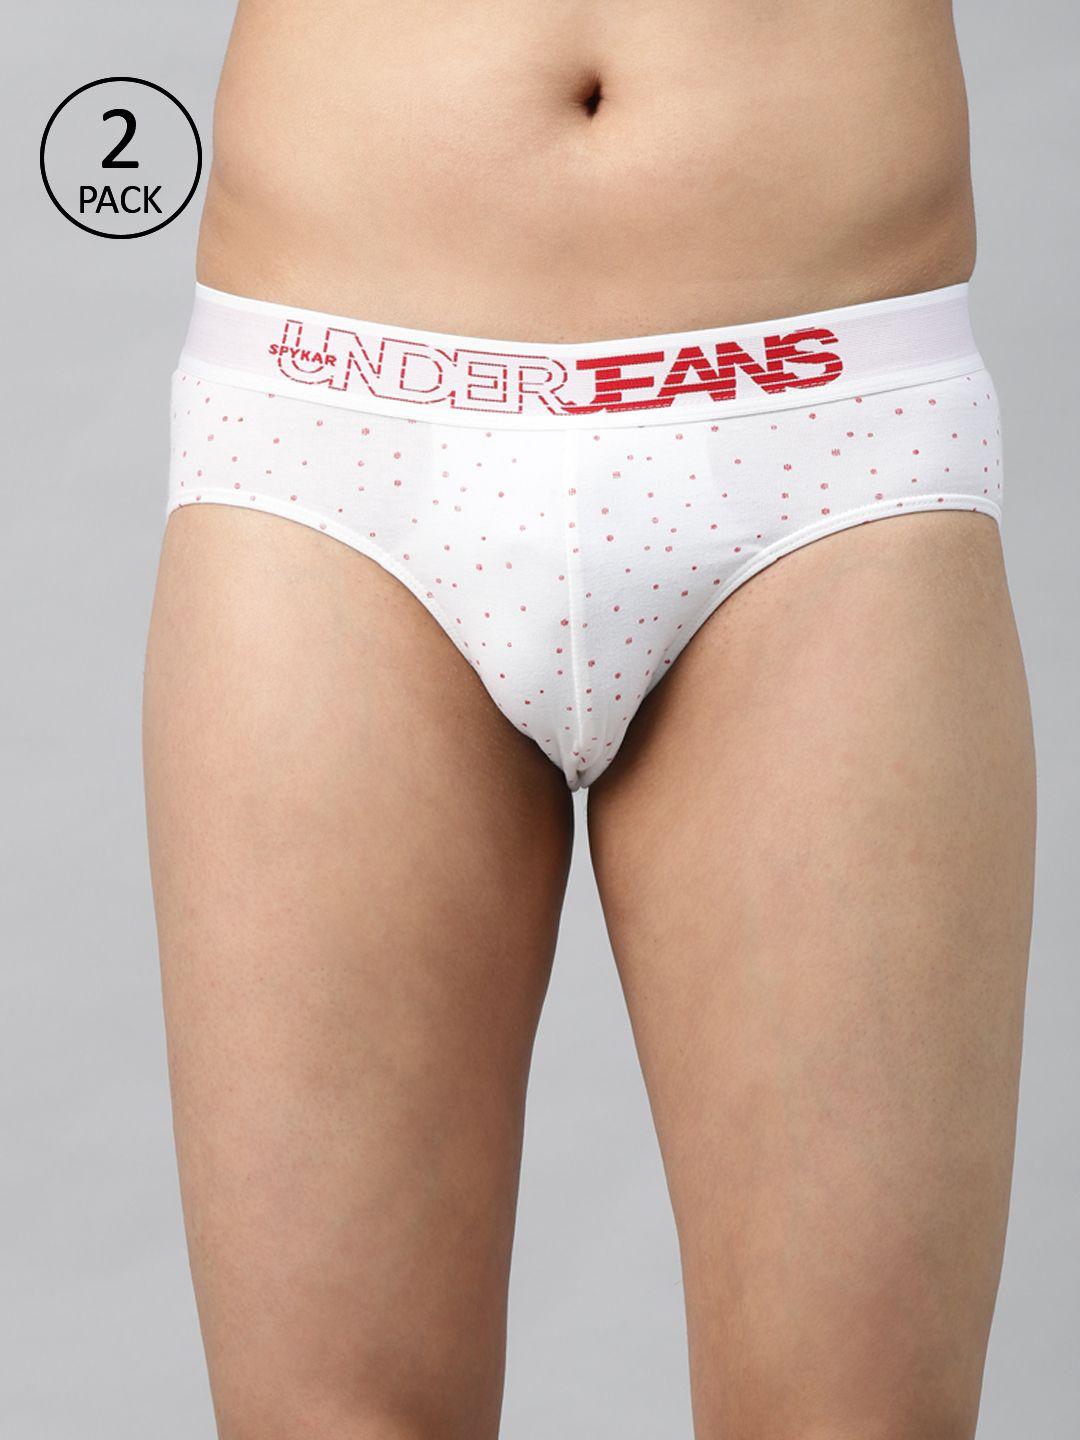 underjeans-by-spykar-men-pack-of-2-white-&-red-printed-briefs-8907966430556